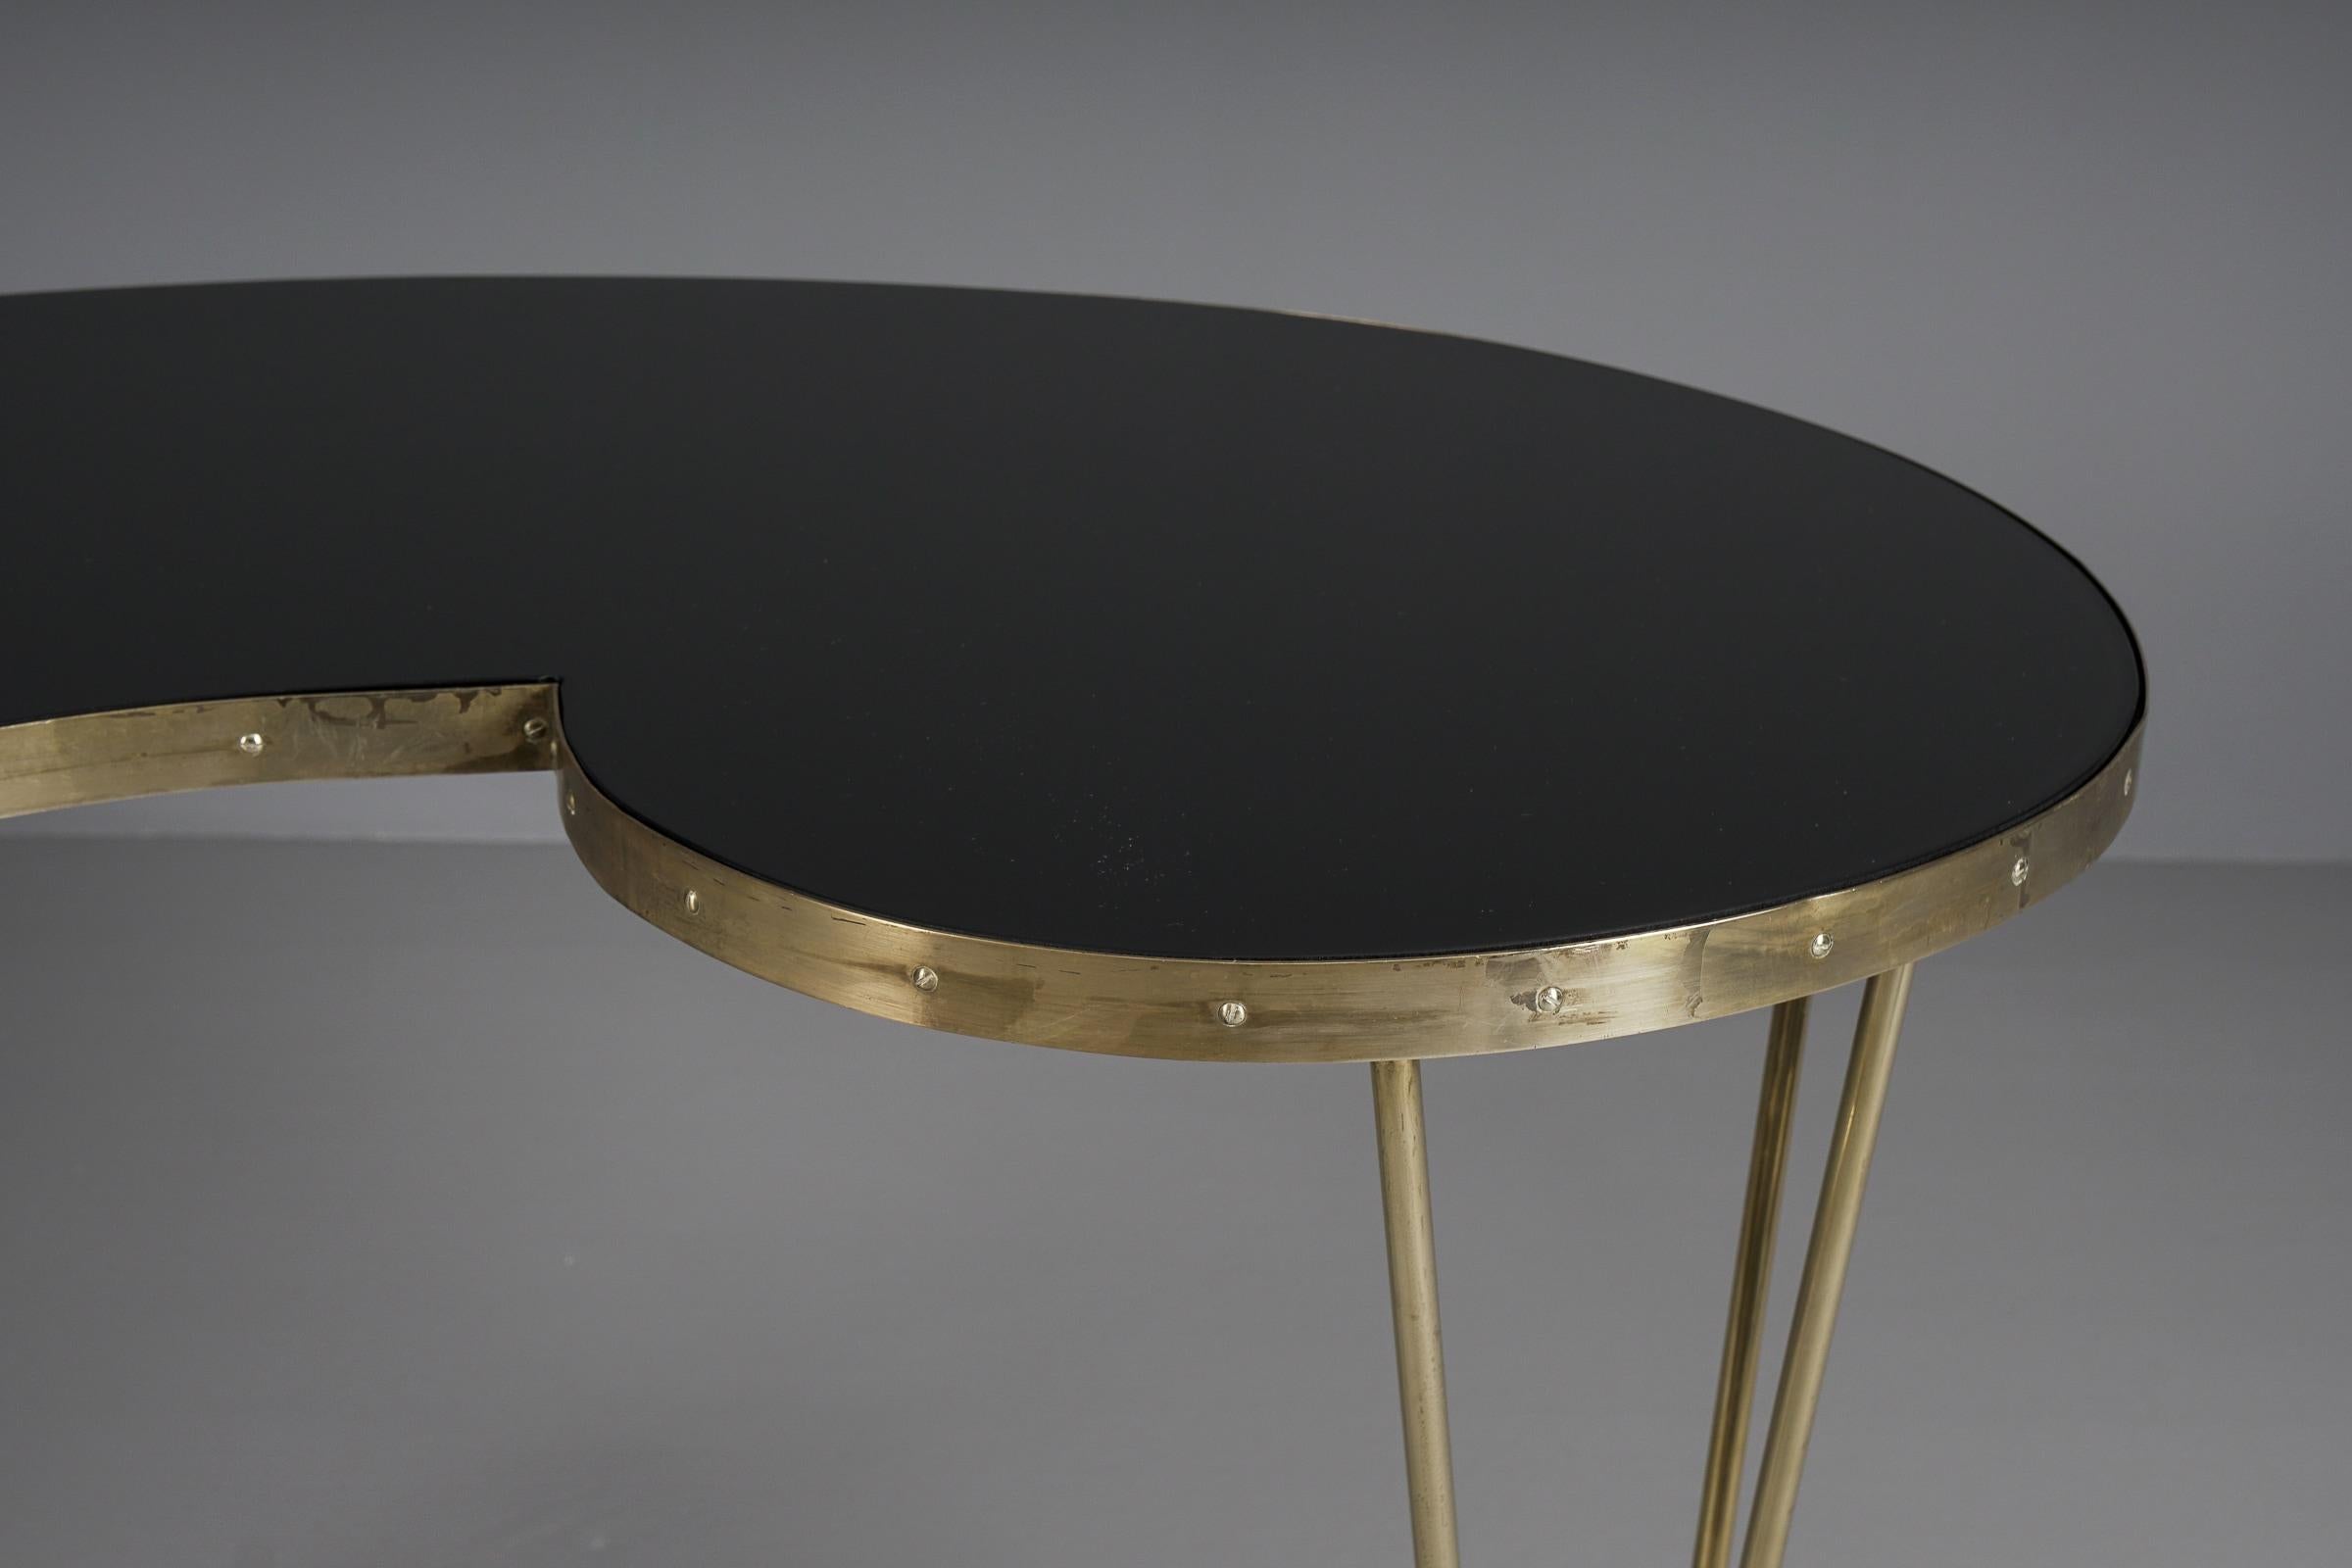 Unique Desk or Dressing Table Made of Solid Brass and Black Glass, 1950s, Italy For Sale 5